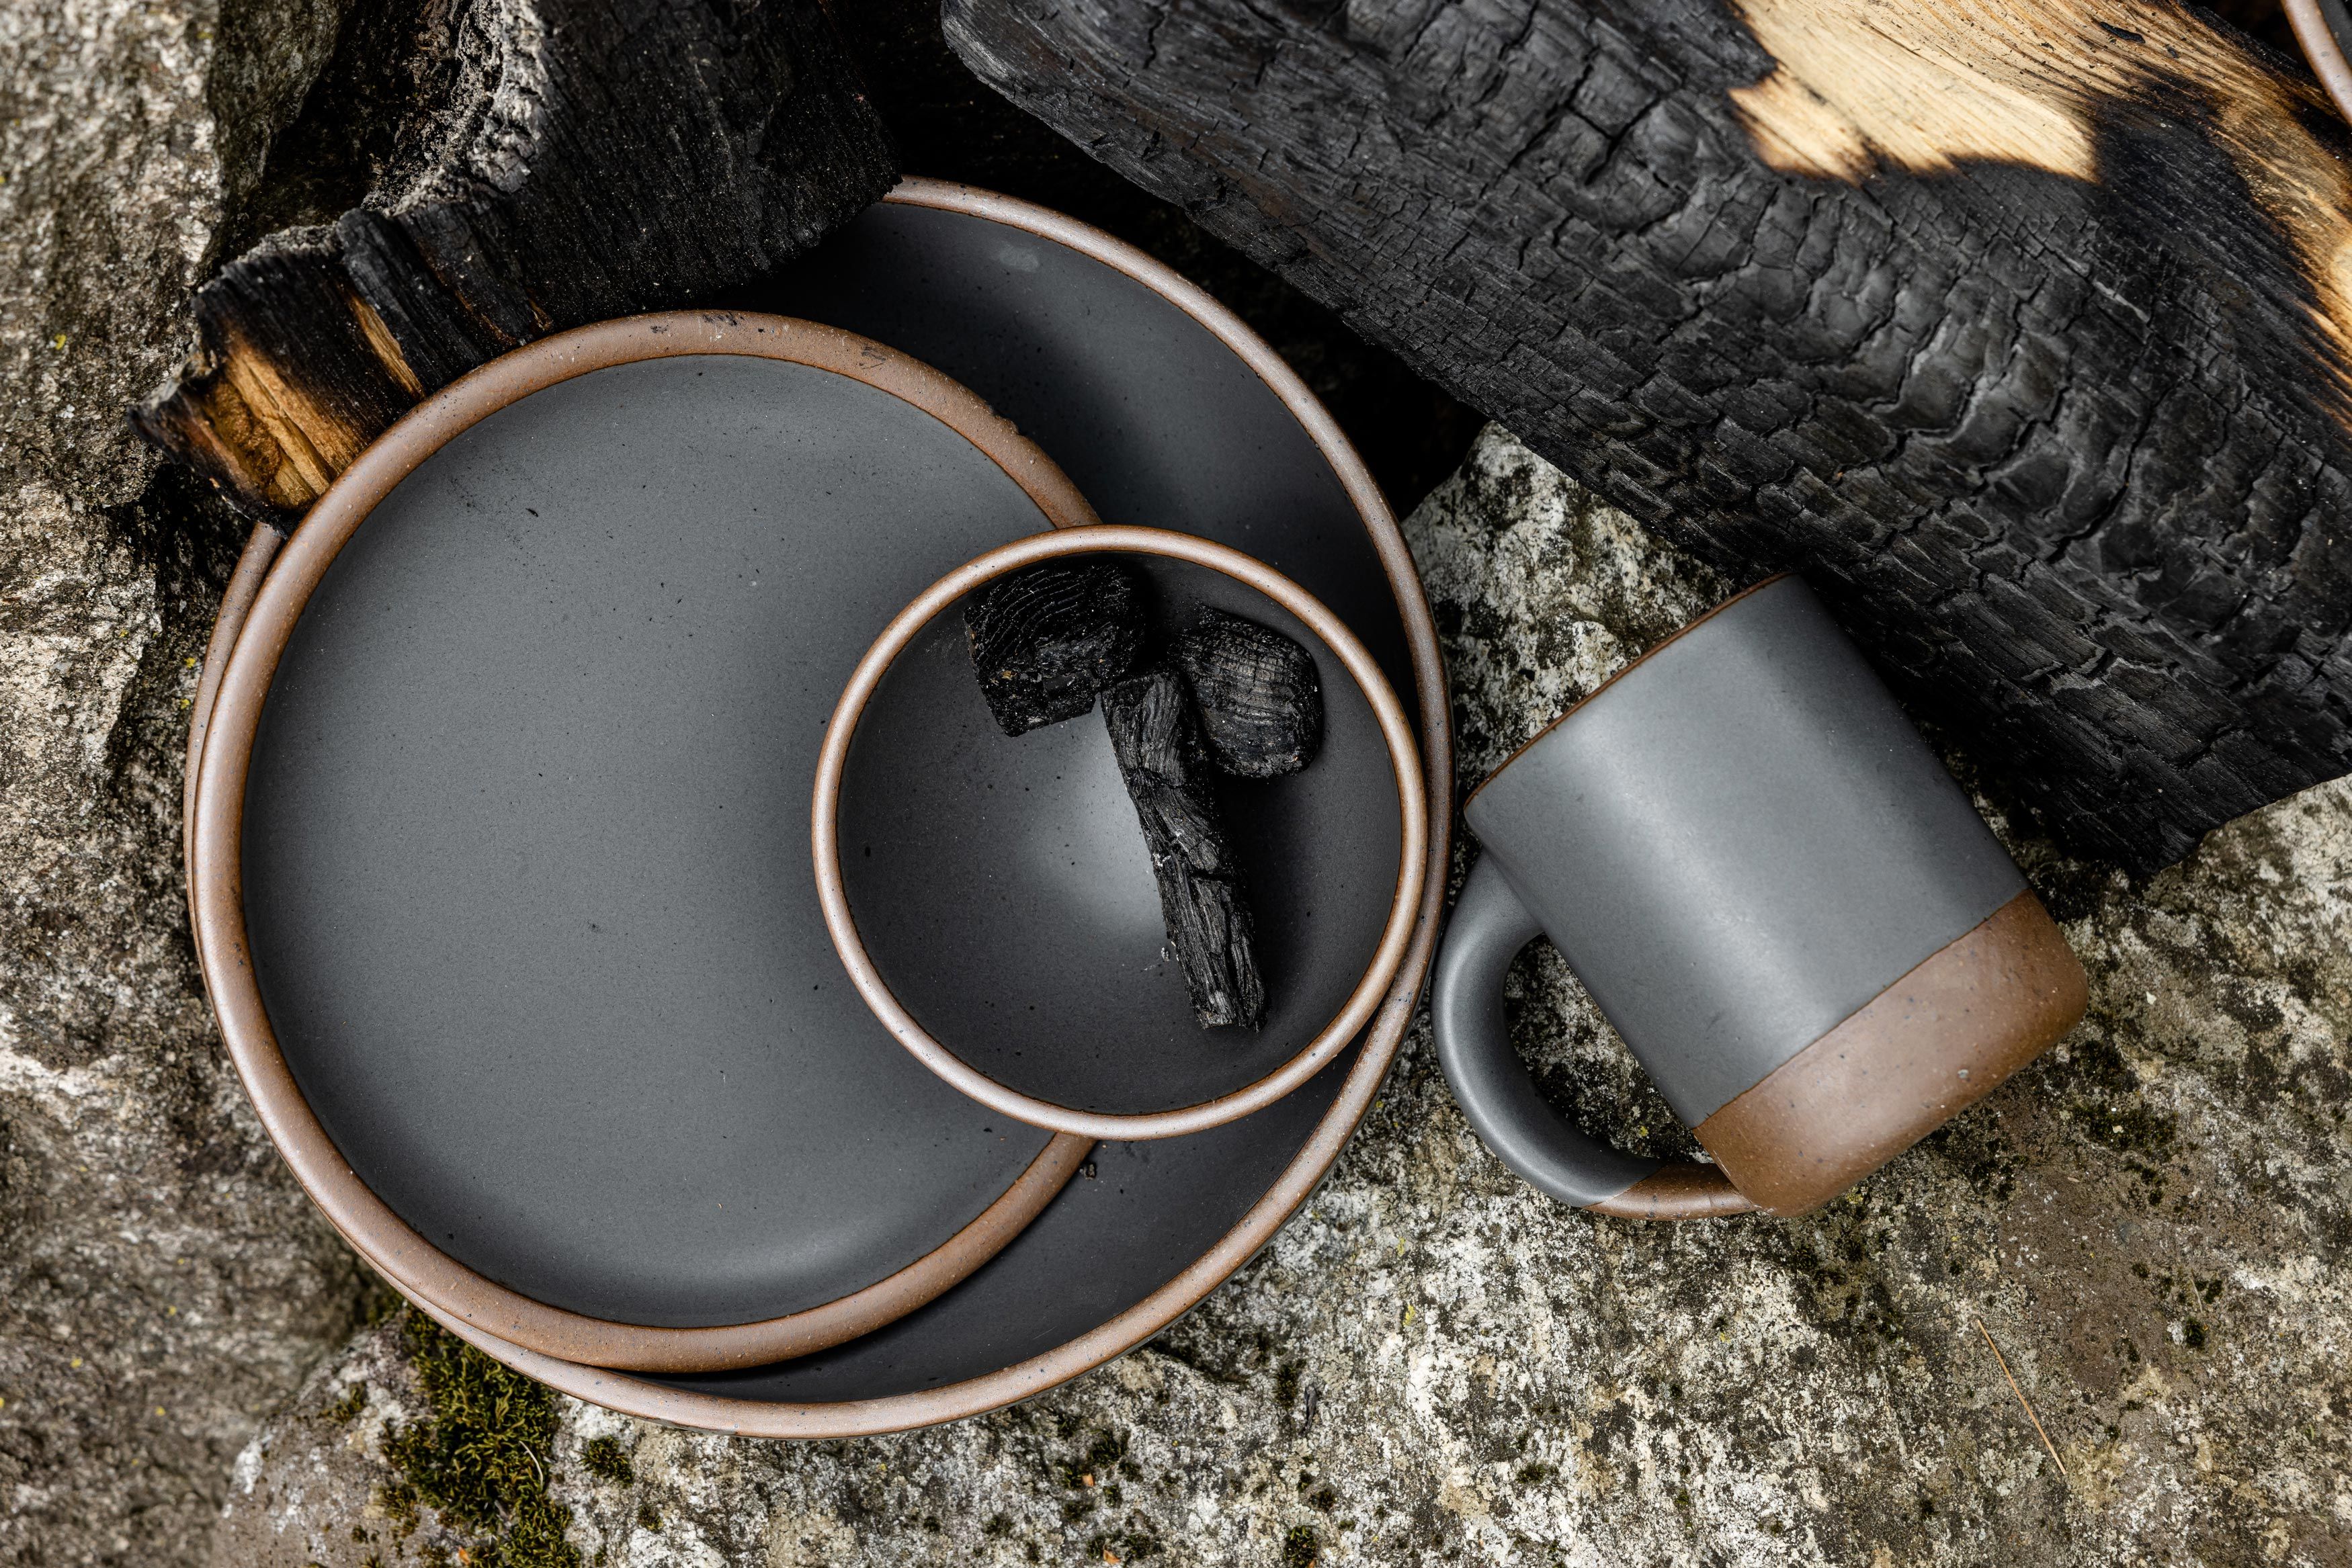 An overhead view of a  stack of grey dinnerware holding charred bits of firewood and a mug on its side lying on a rock amongst large piece of partially charred firewood.